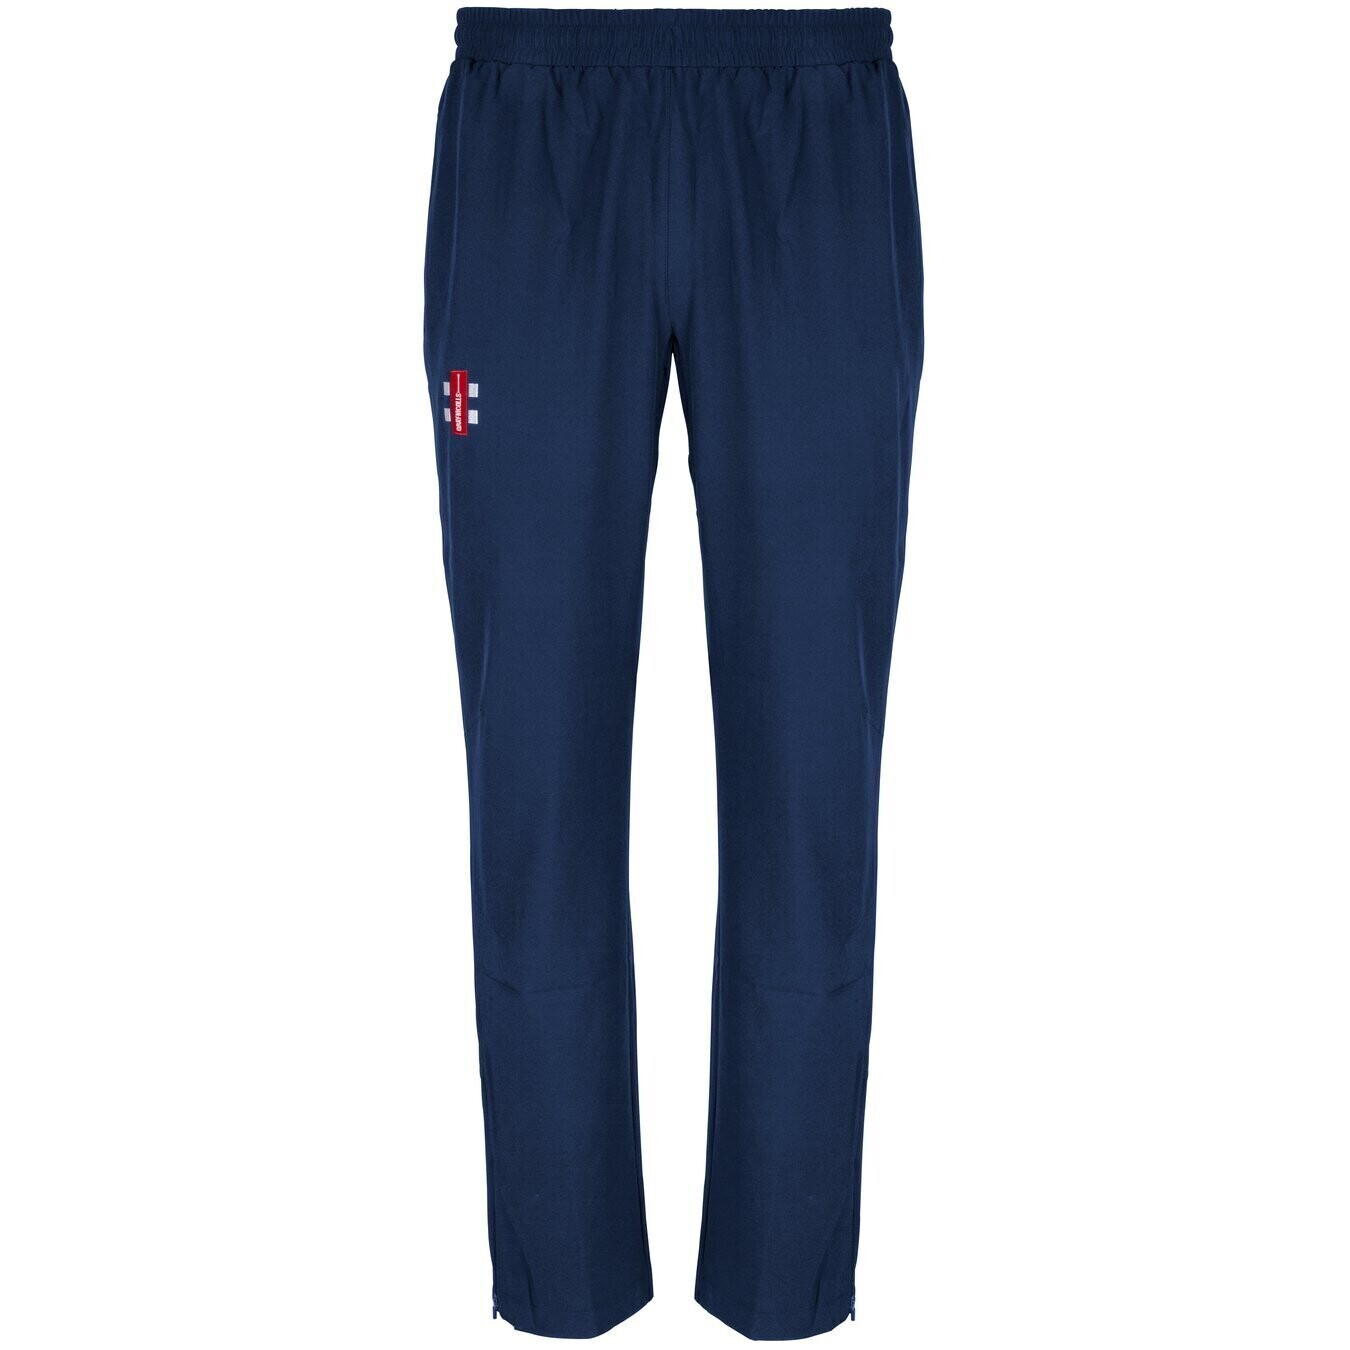 Crook Town Velocity Training Trousers